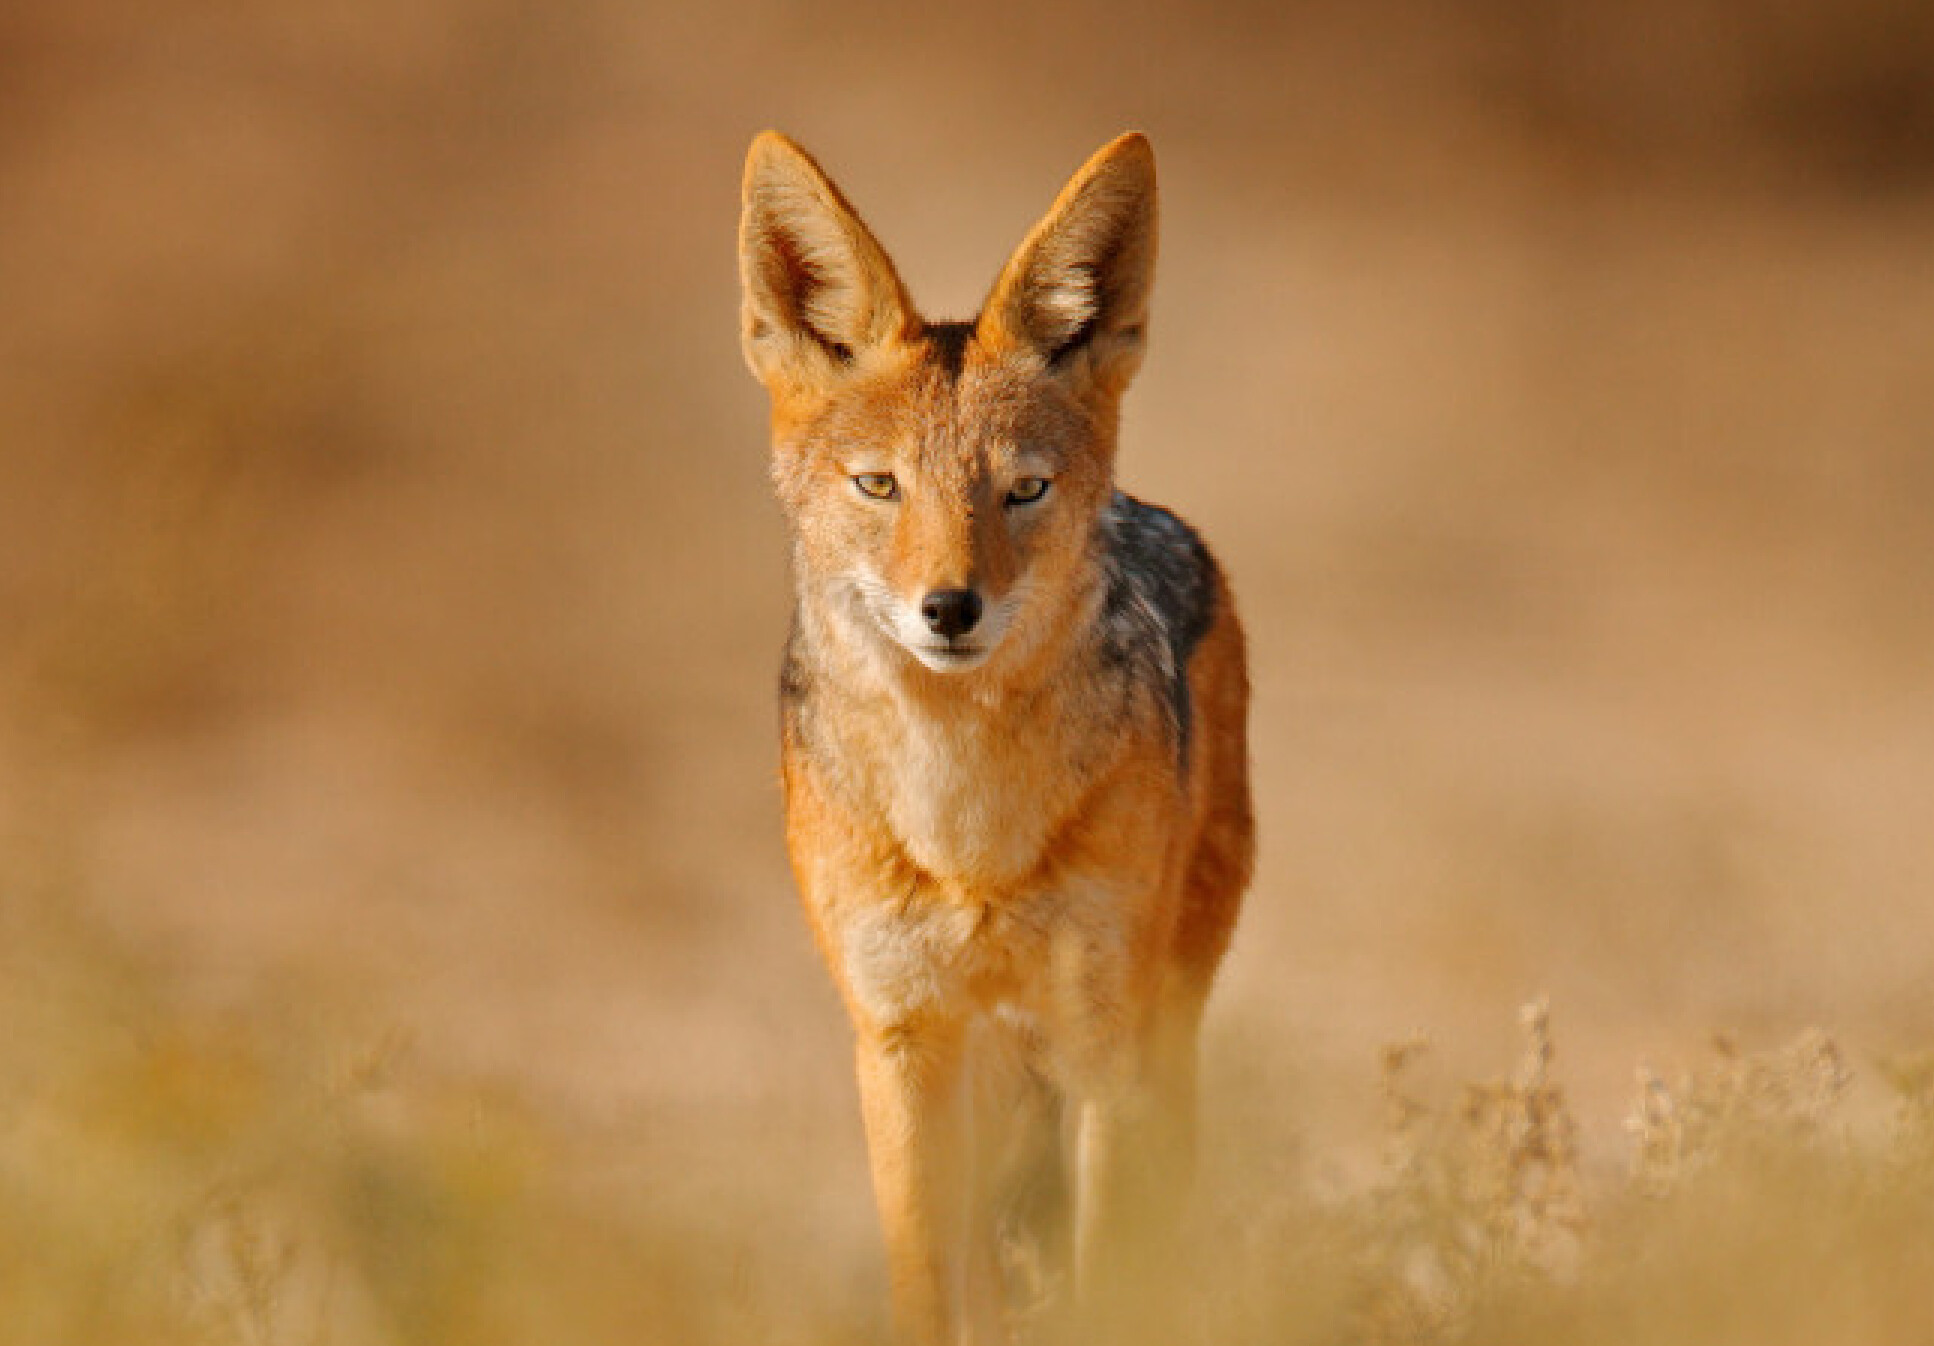 A jackal, a medium-sized canid native to Africa and Eurasia